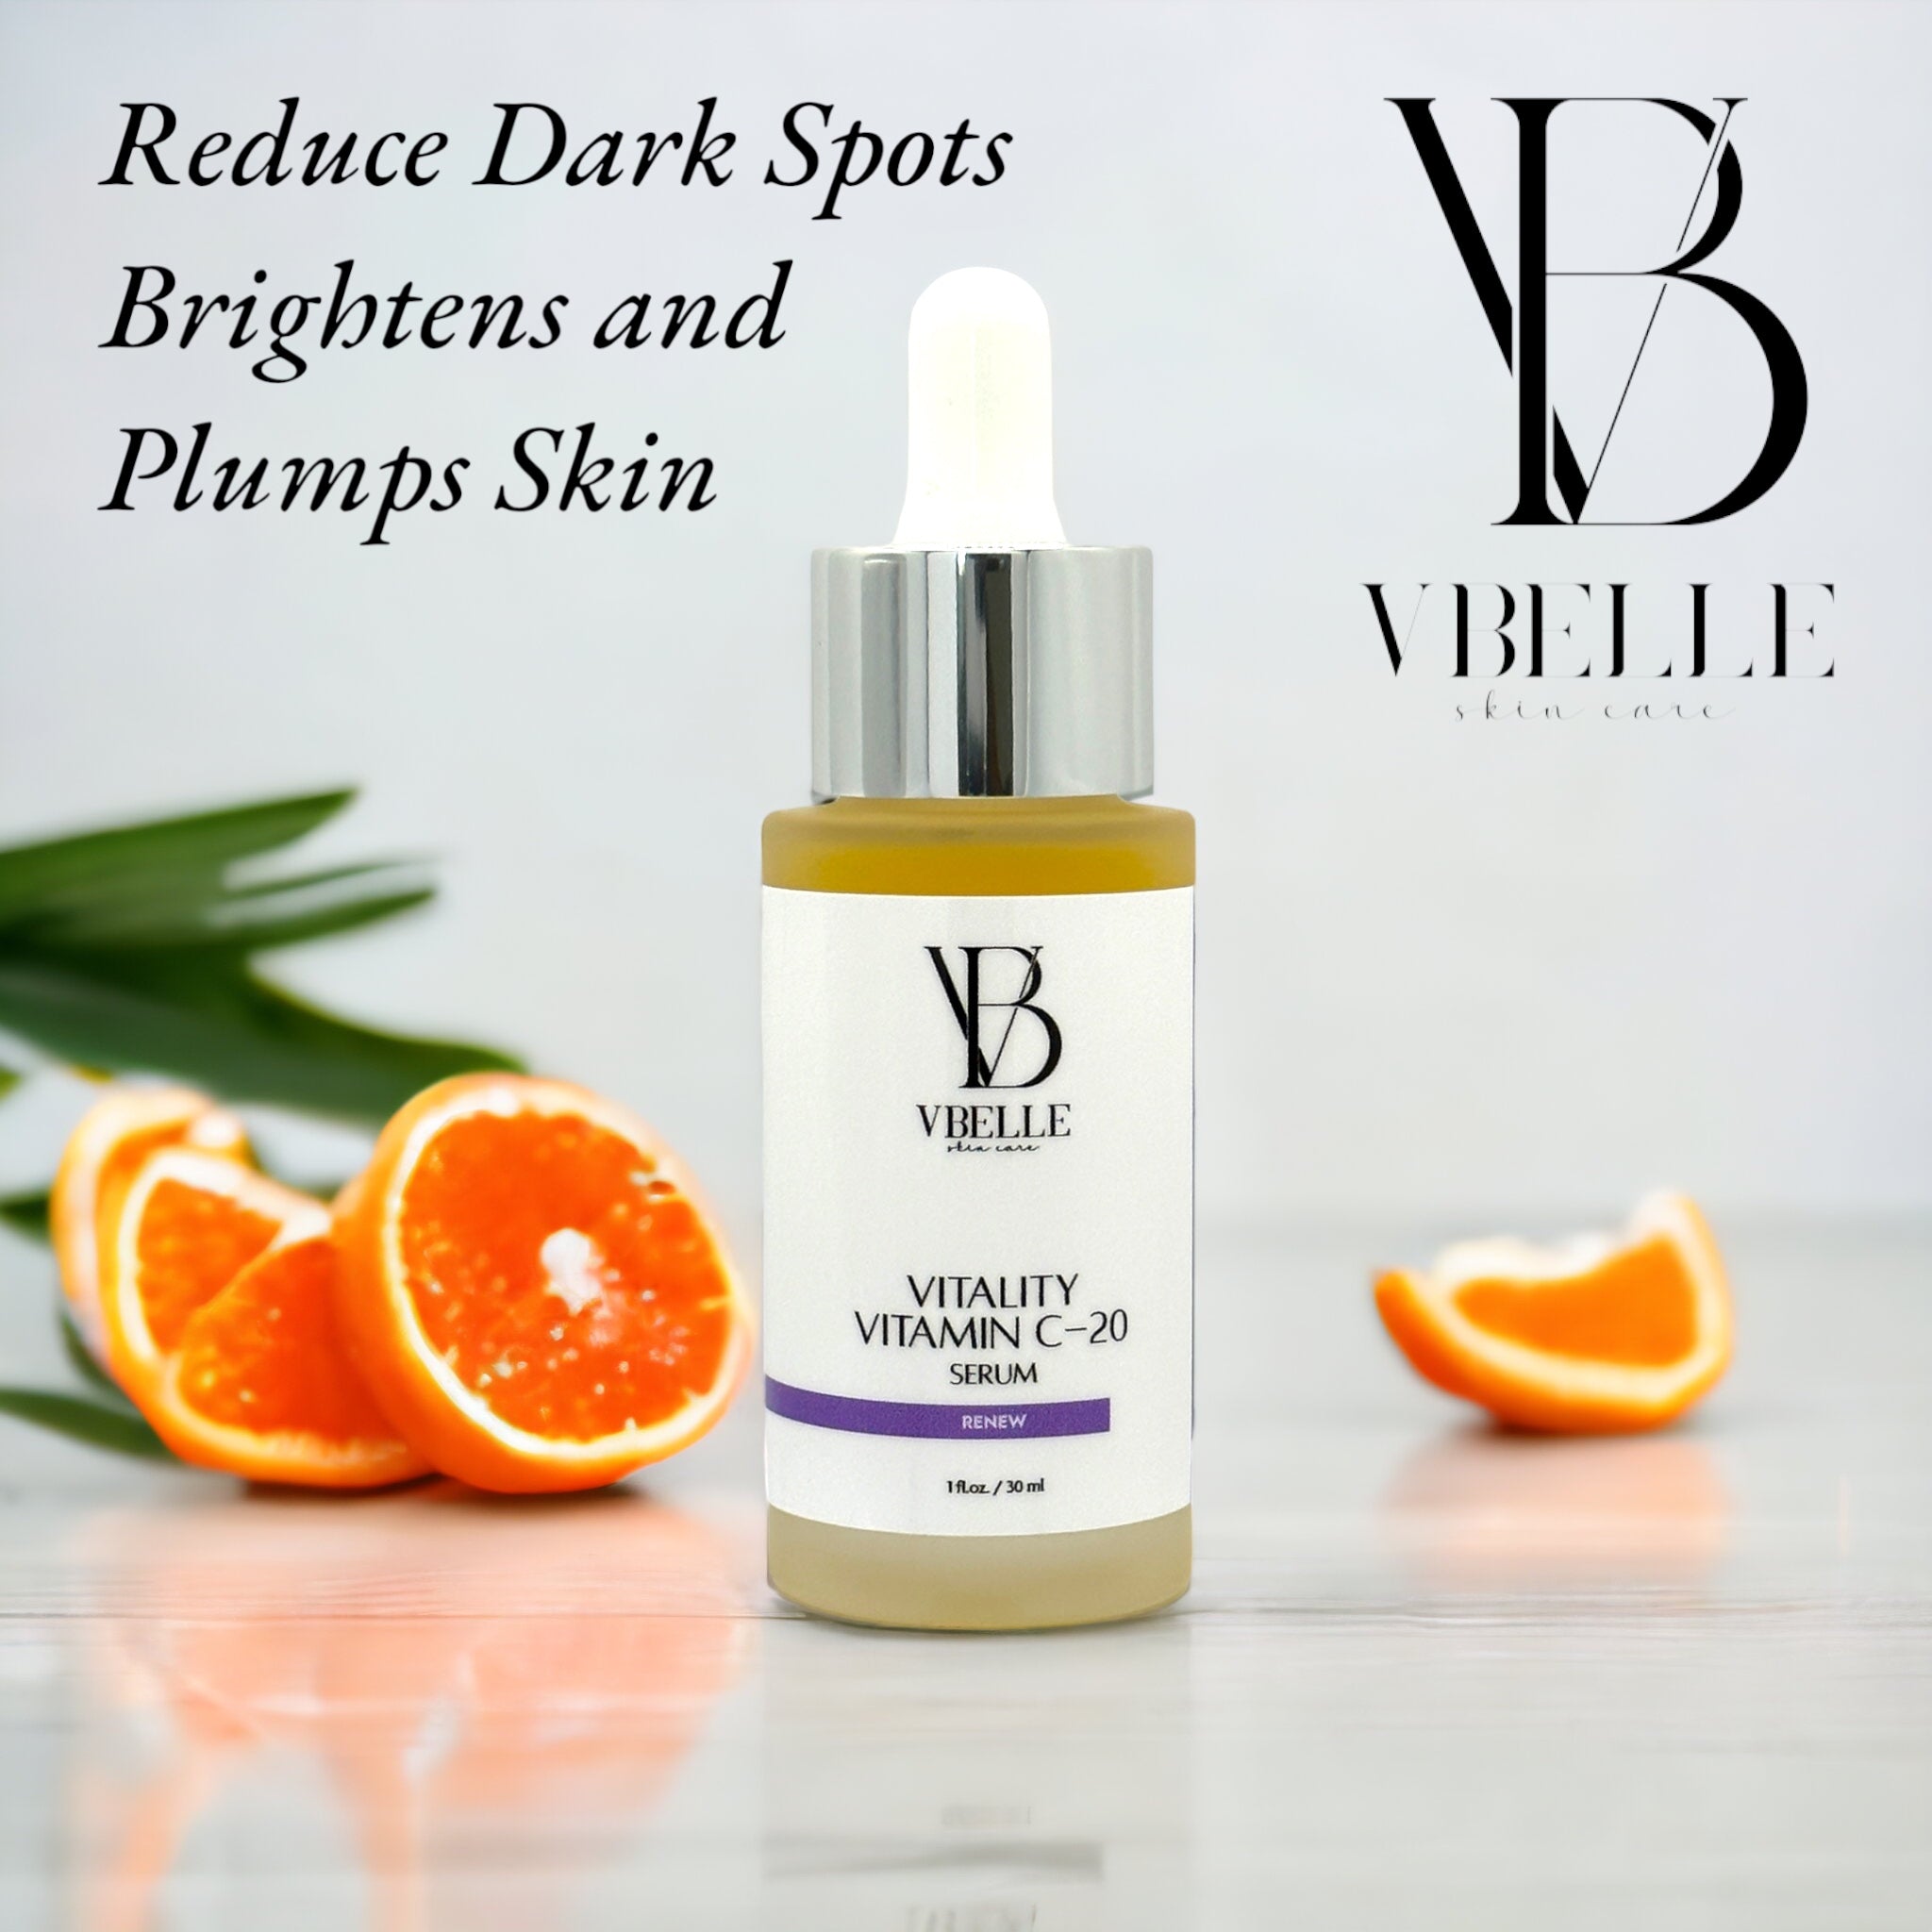 a bottle of vitality vitamin c-20 serum on a reflective surface and oranges in the background